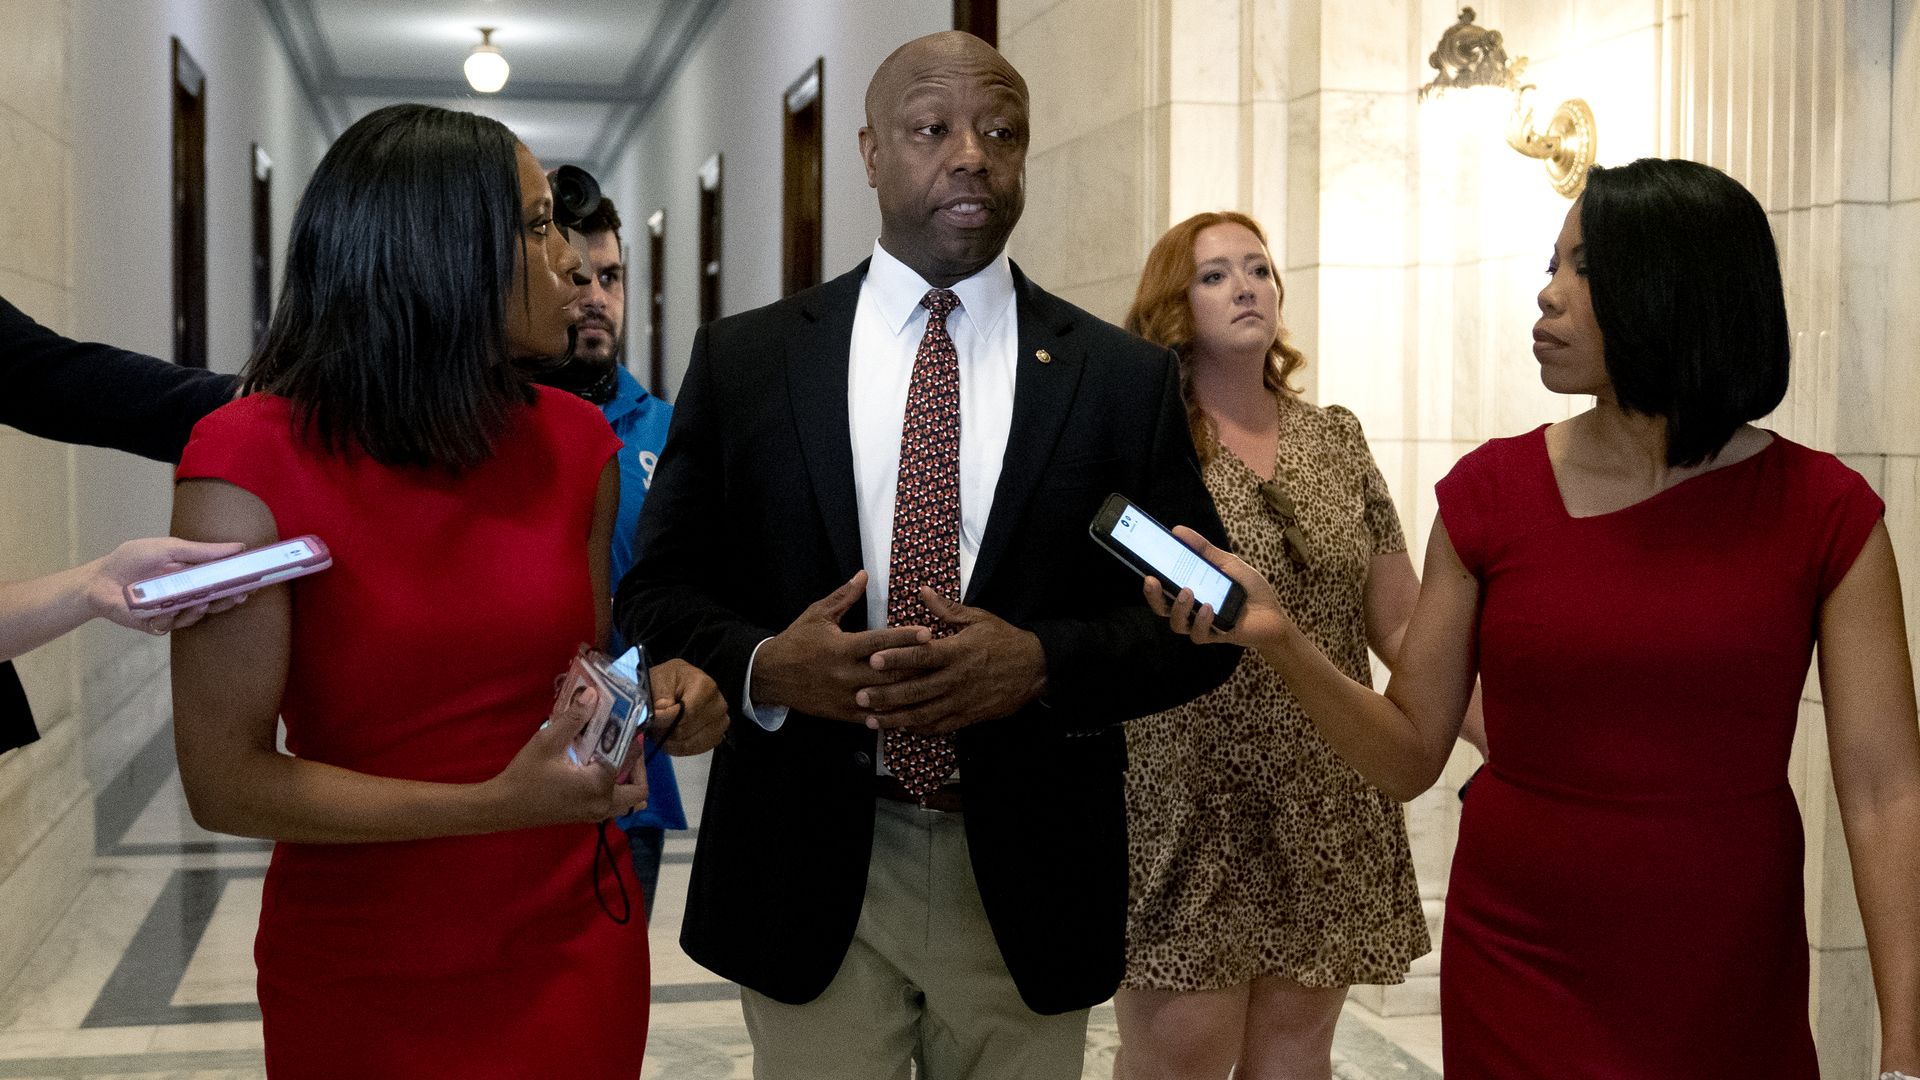 Sen. Tim Scott is seen speaking with reporters as he walks through the Russell Office Building.